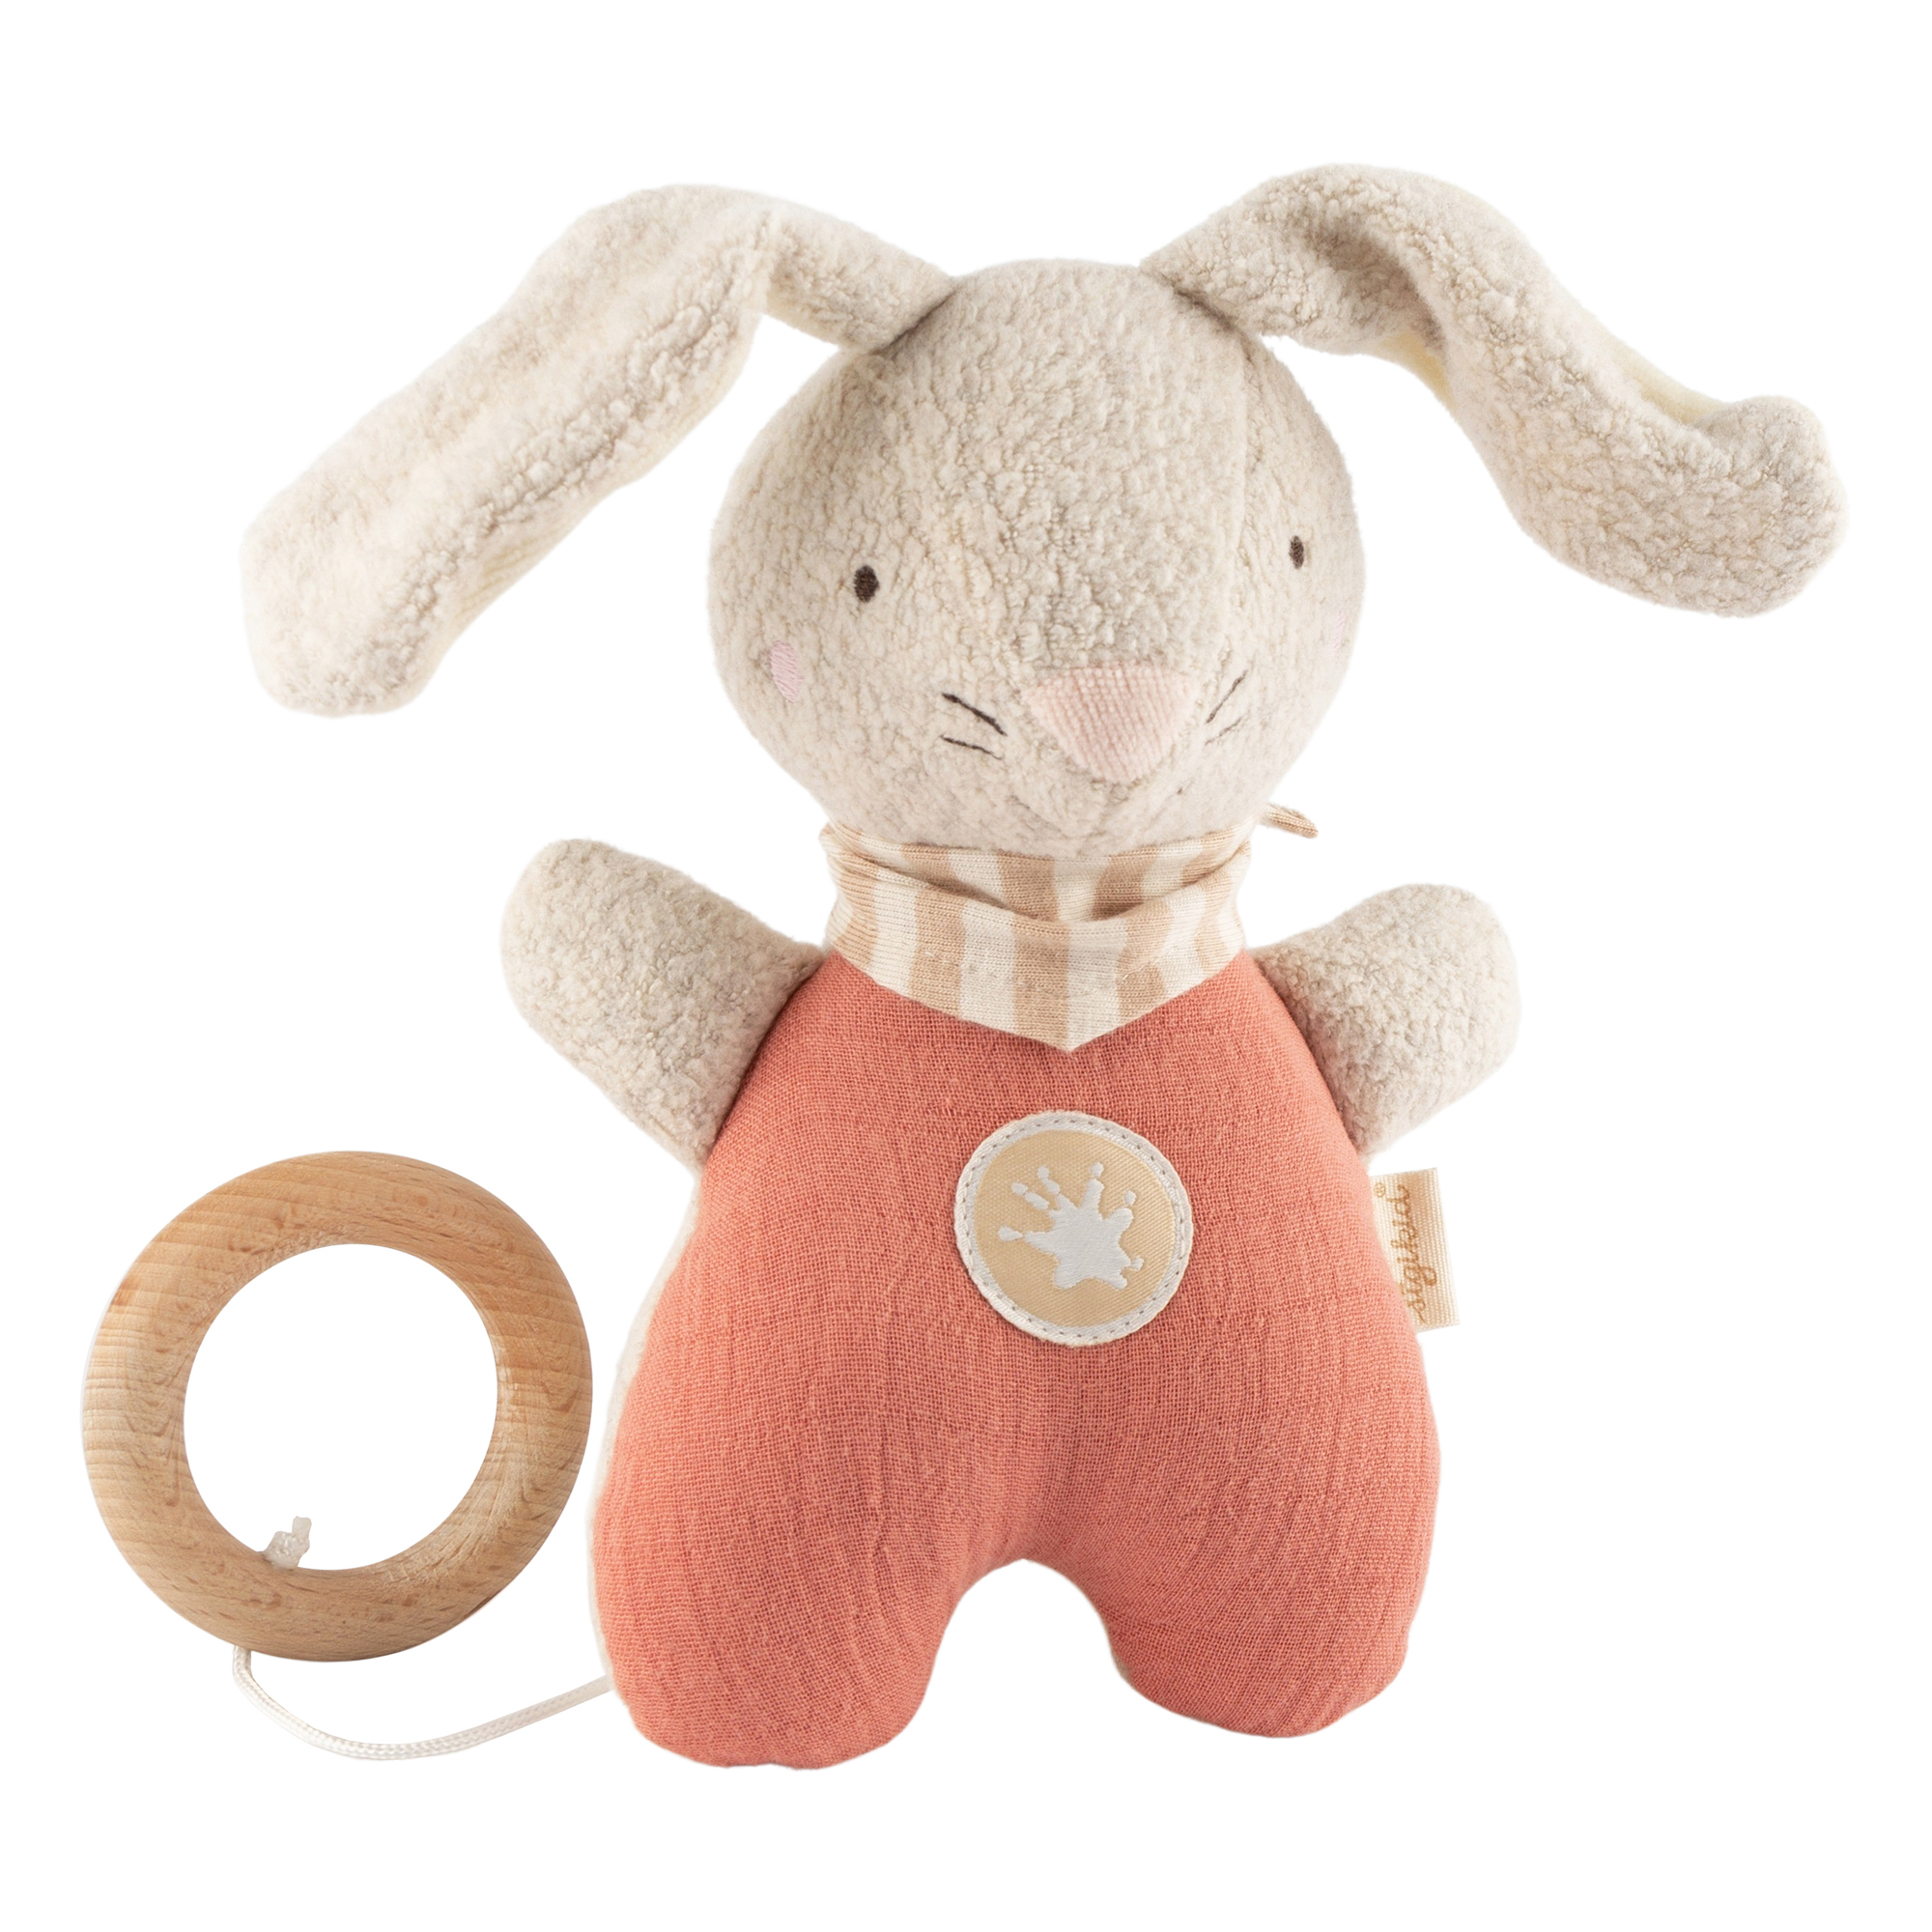 Muslin musical baby soft toy bunny, coral pink